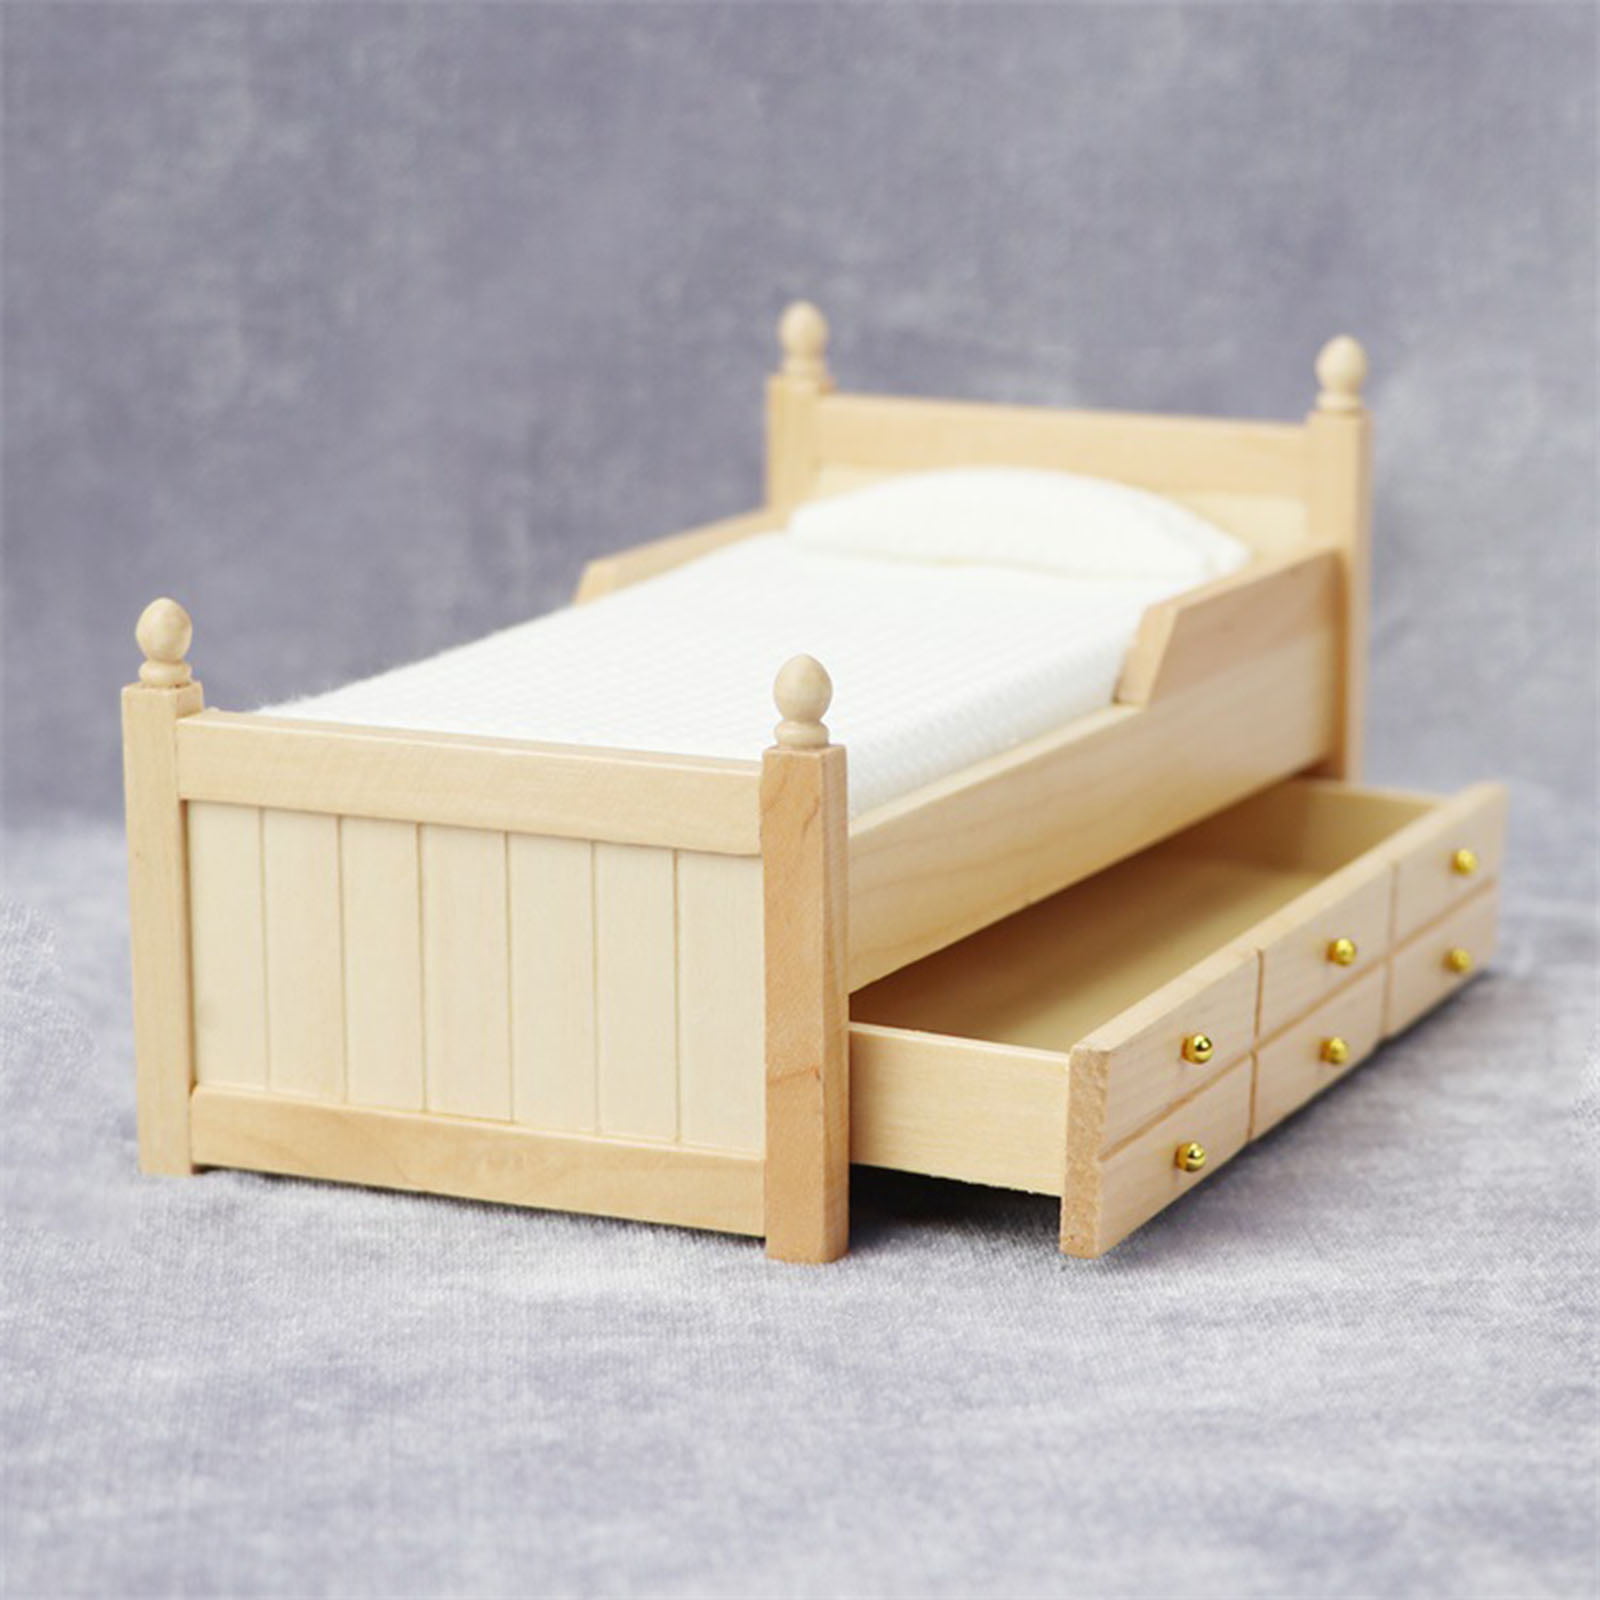 Dollhouse Furniture Queen Bed Set, Mini Bedroom Accessories for 6 inch  Dolls, Blue Bedding, Brown Wooden Frame, 1/12 Scale